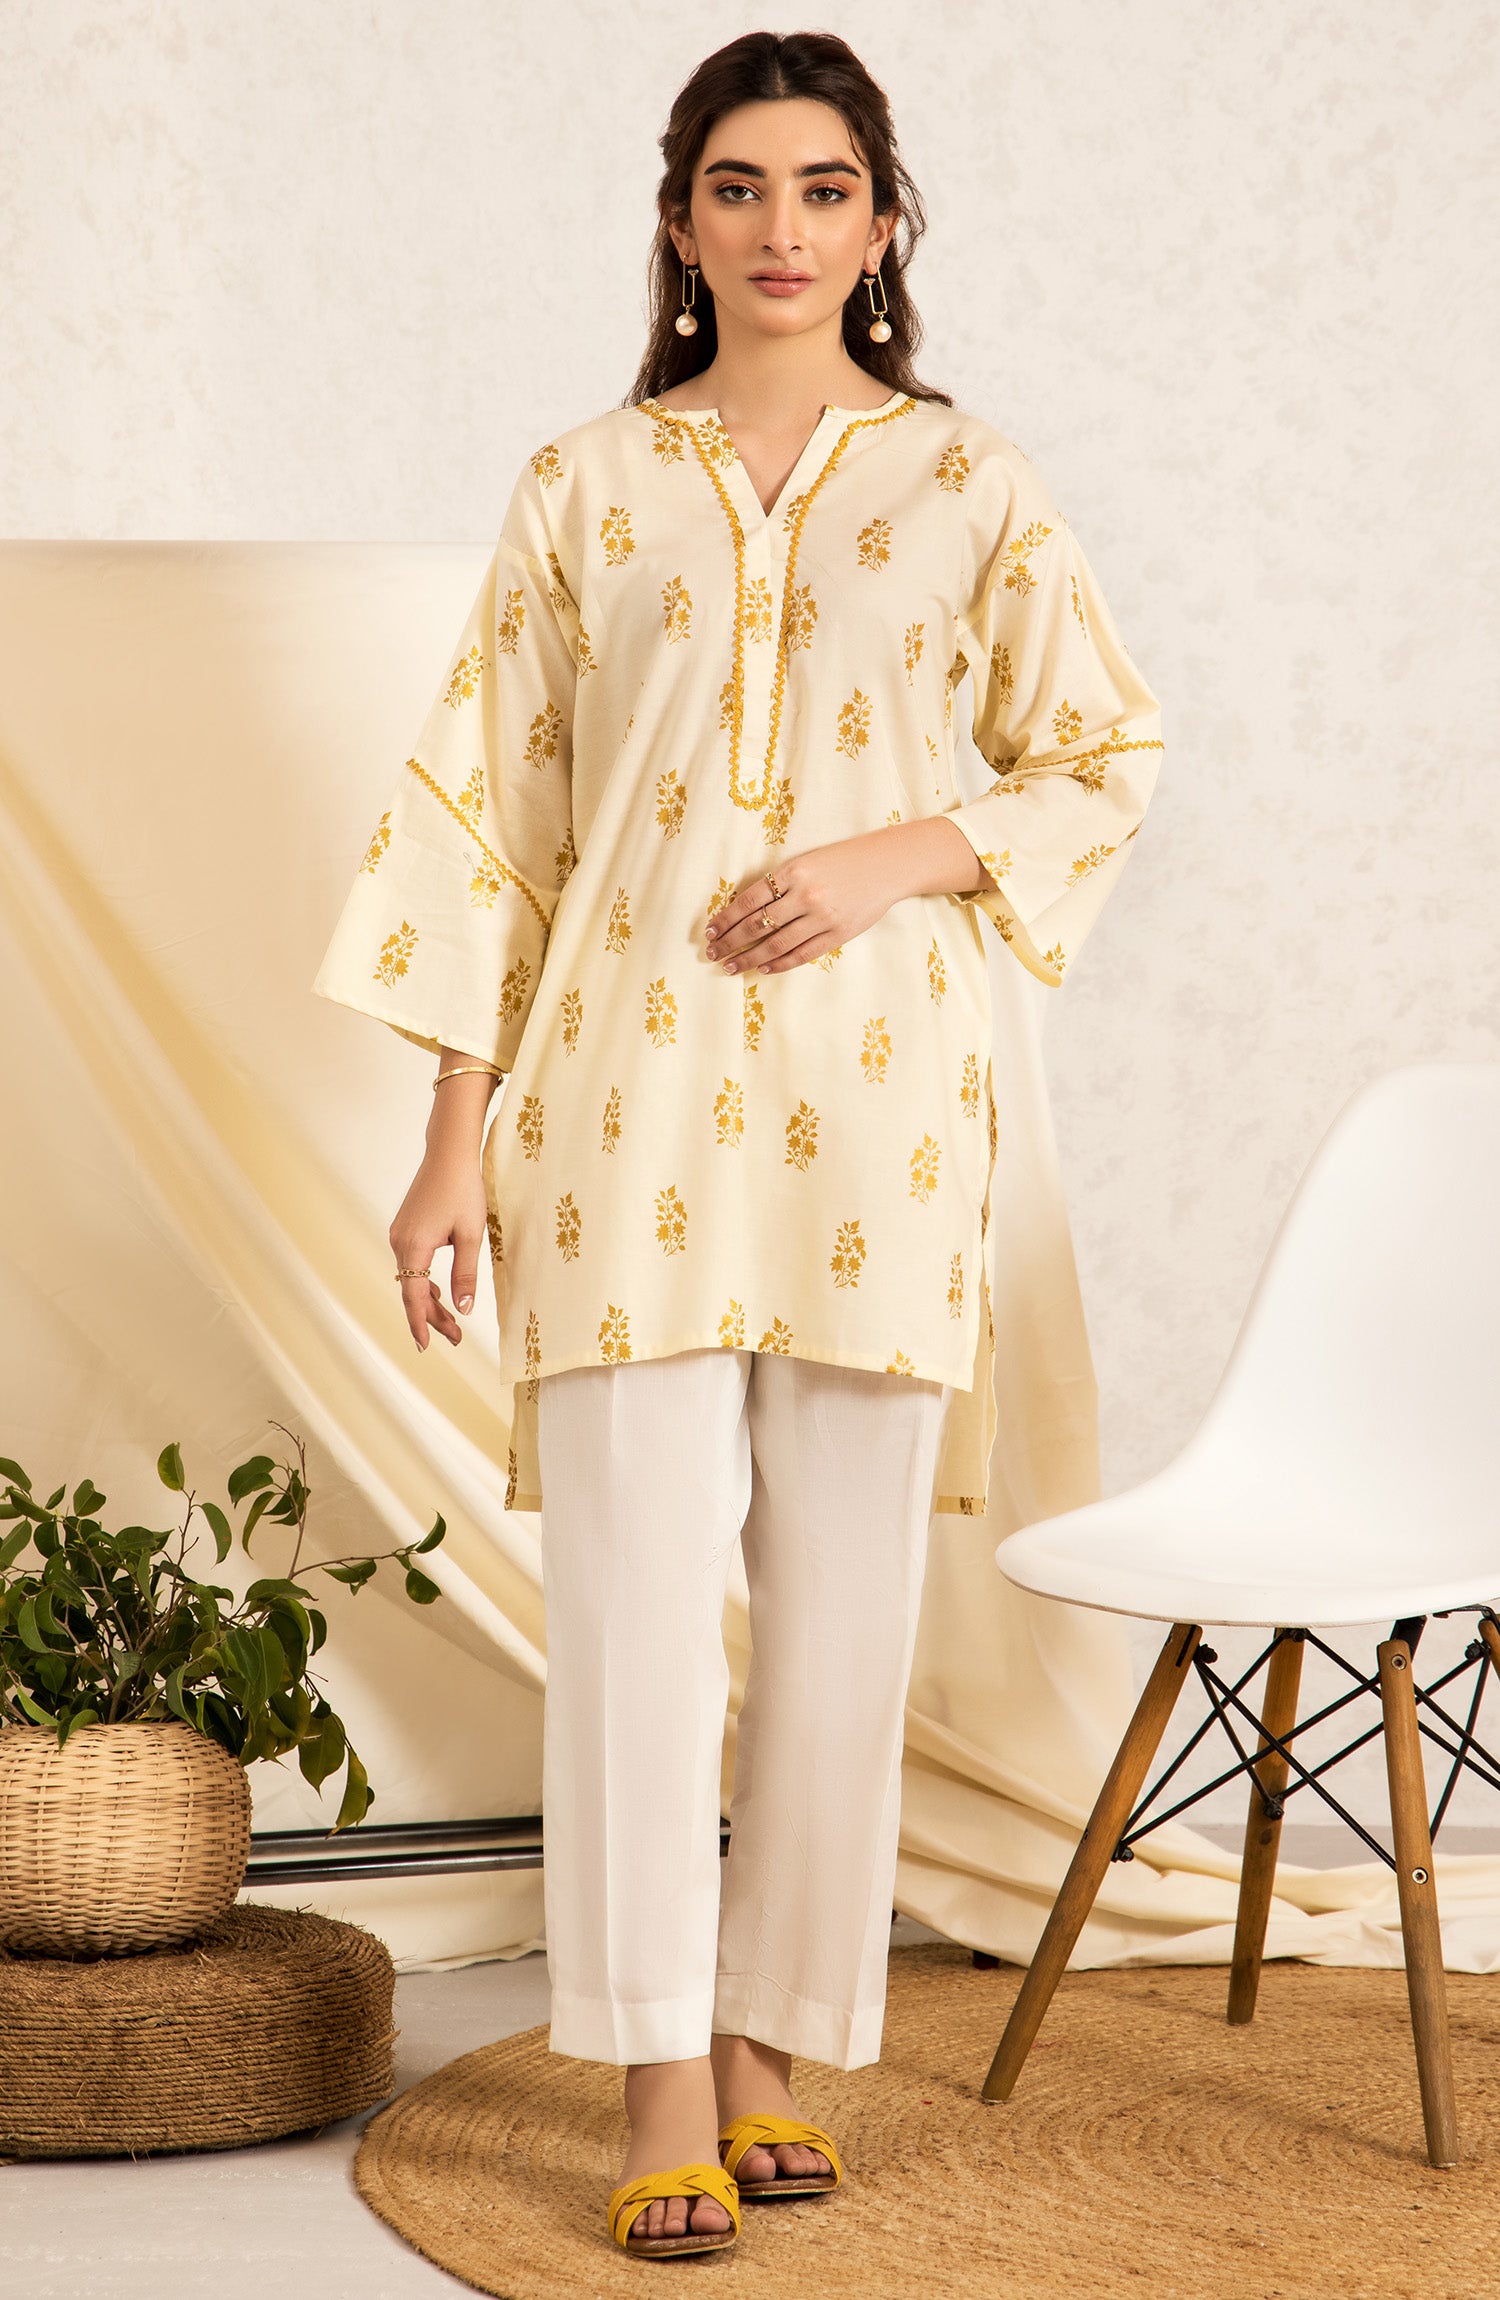 nrc-51-s-creme stitched 1 piece Gold Printed Lawn Shirt 